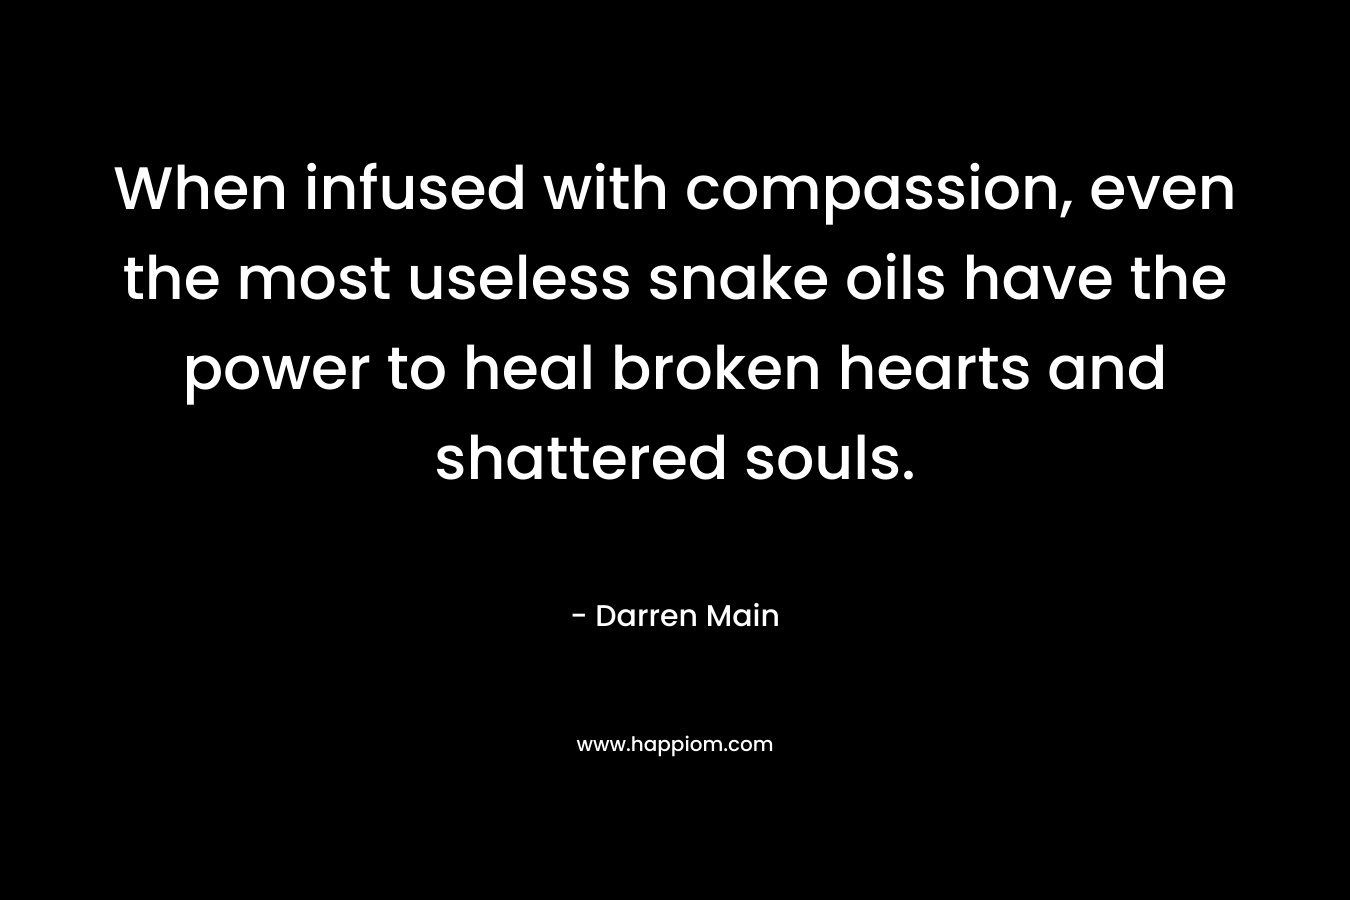 When infused with compassion, even the most useless snake oils have the power to heal broken hearts and shattered souls. – Darren Main